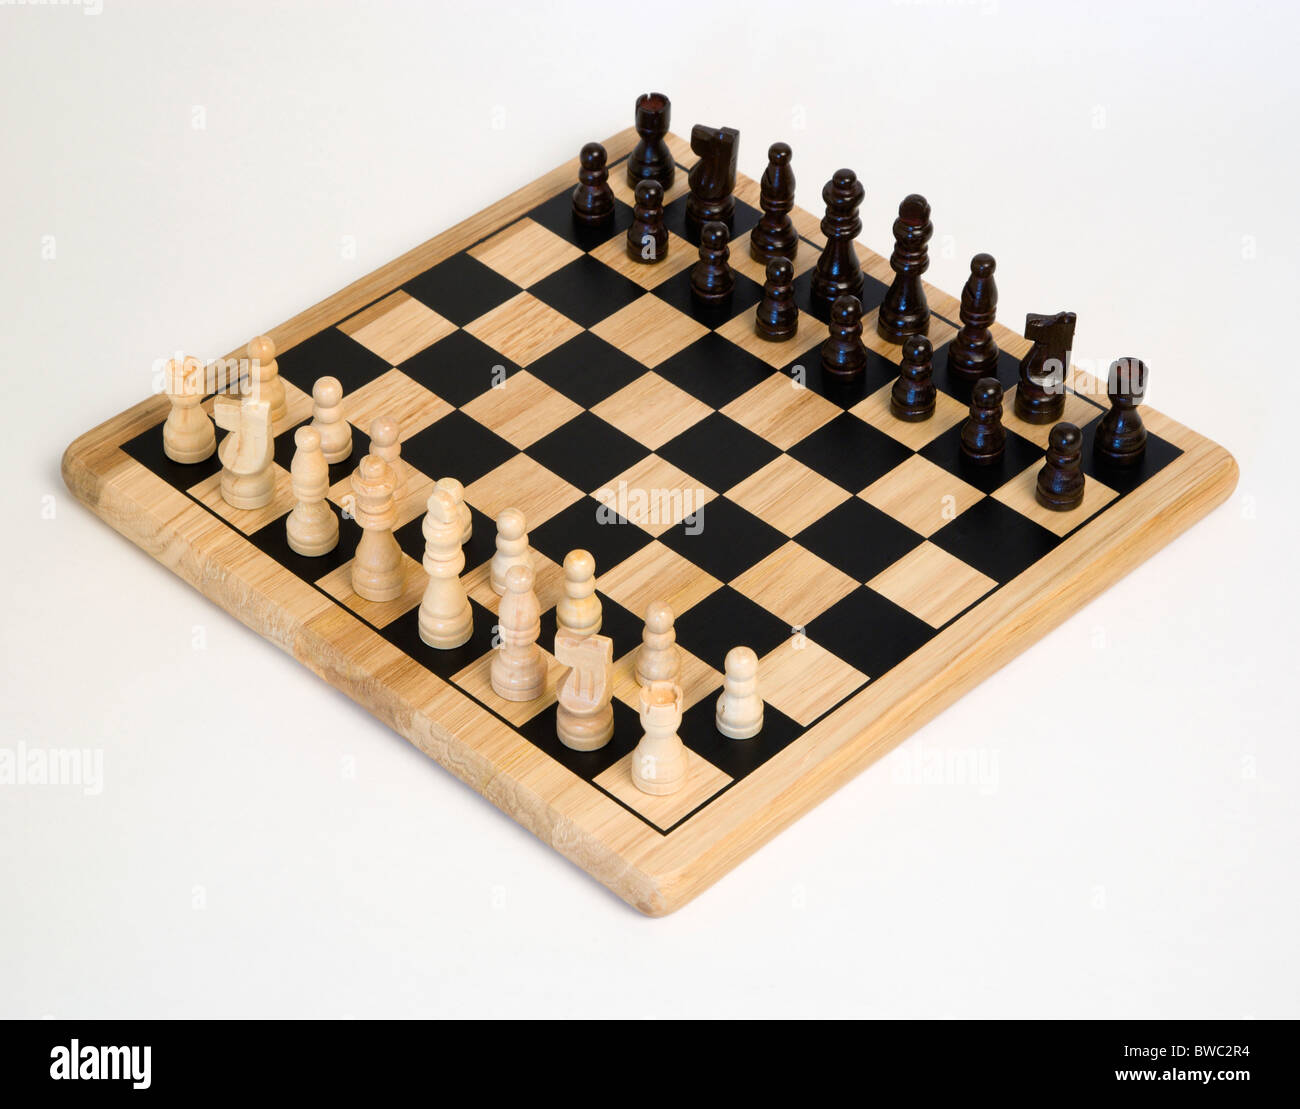 Toys, Games, Board Games, Chess board with pieces laid out for start of game against a white background. Stock Photo